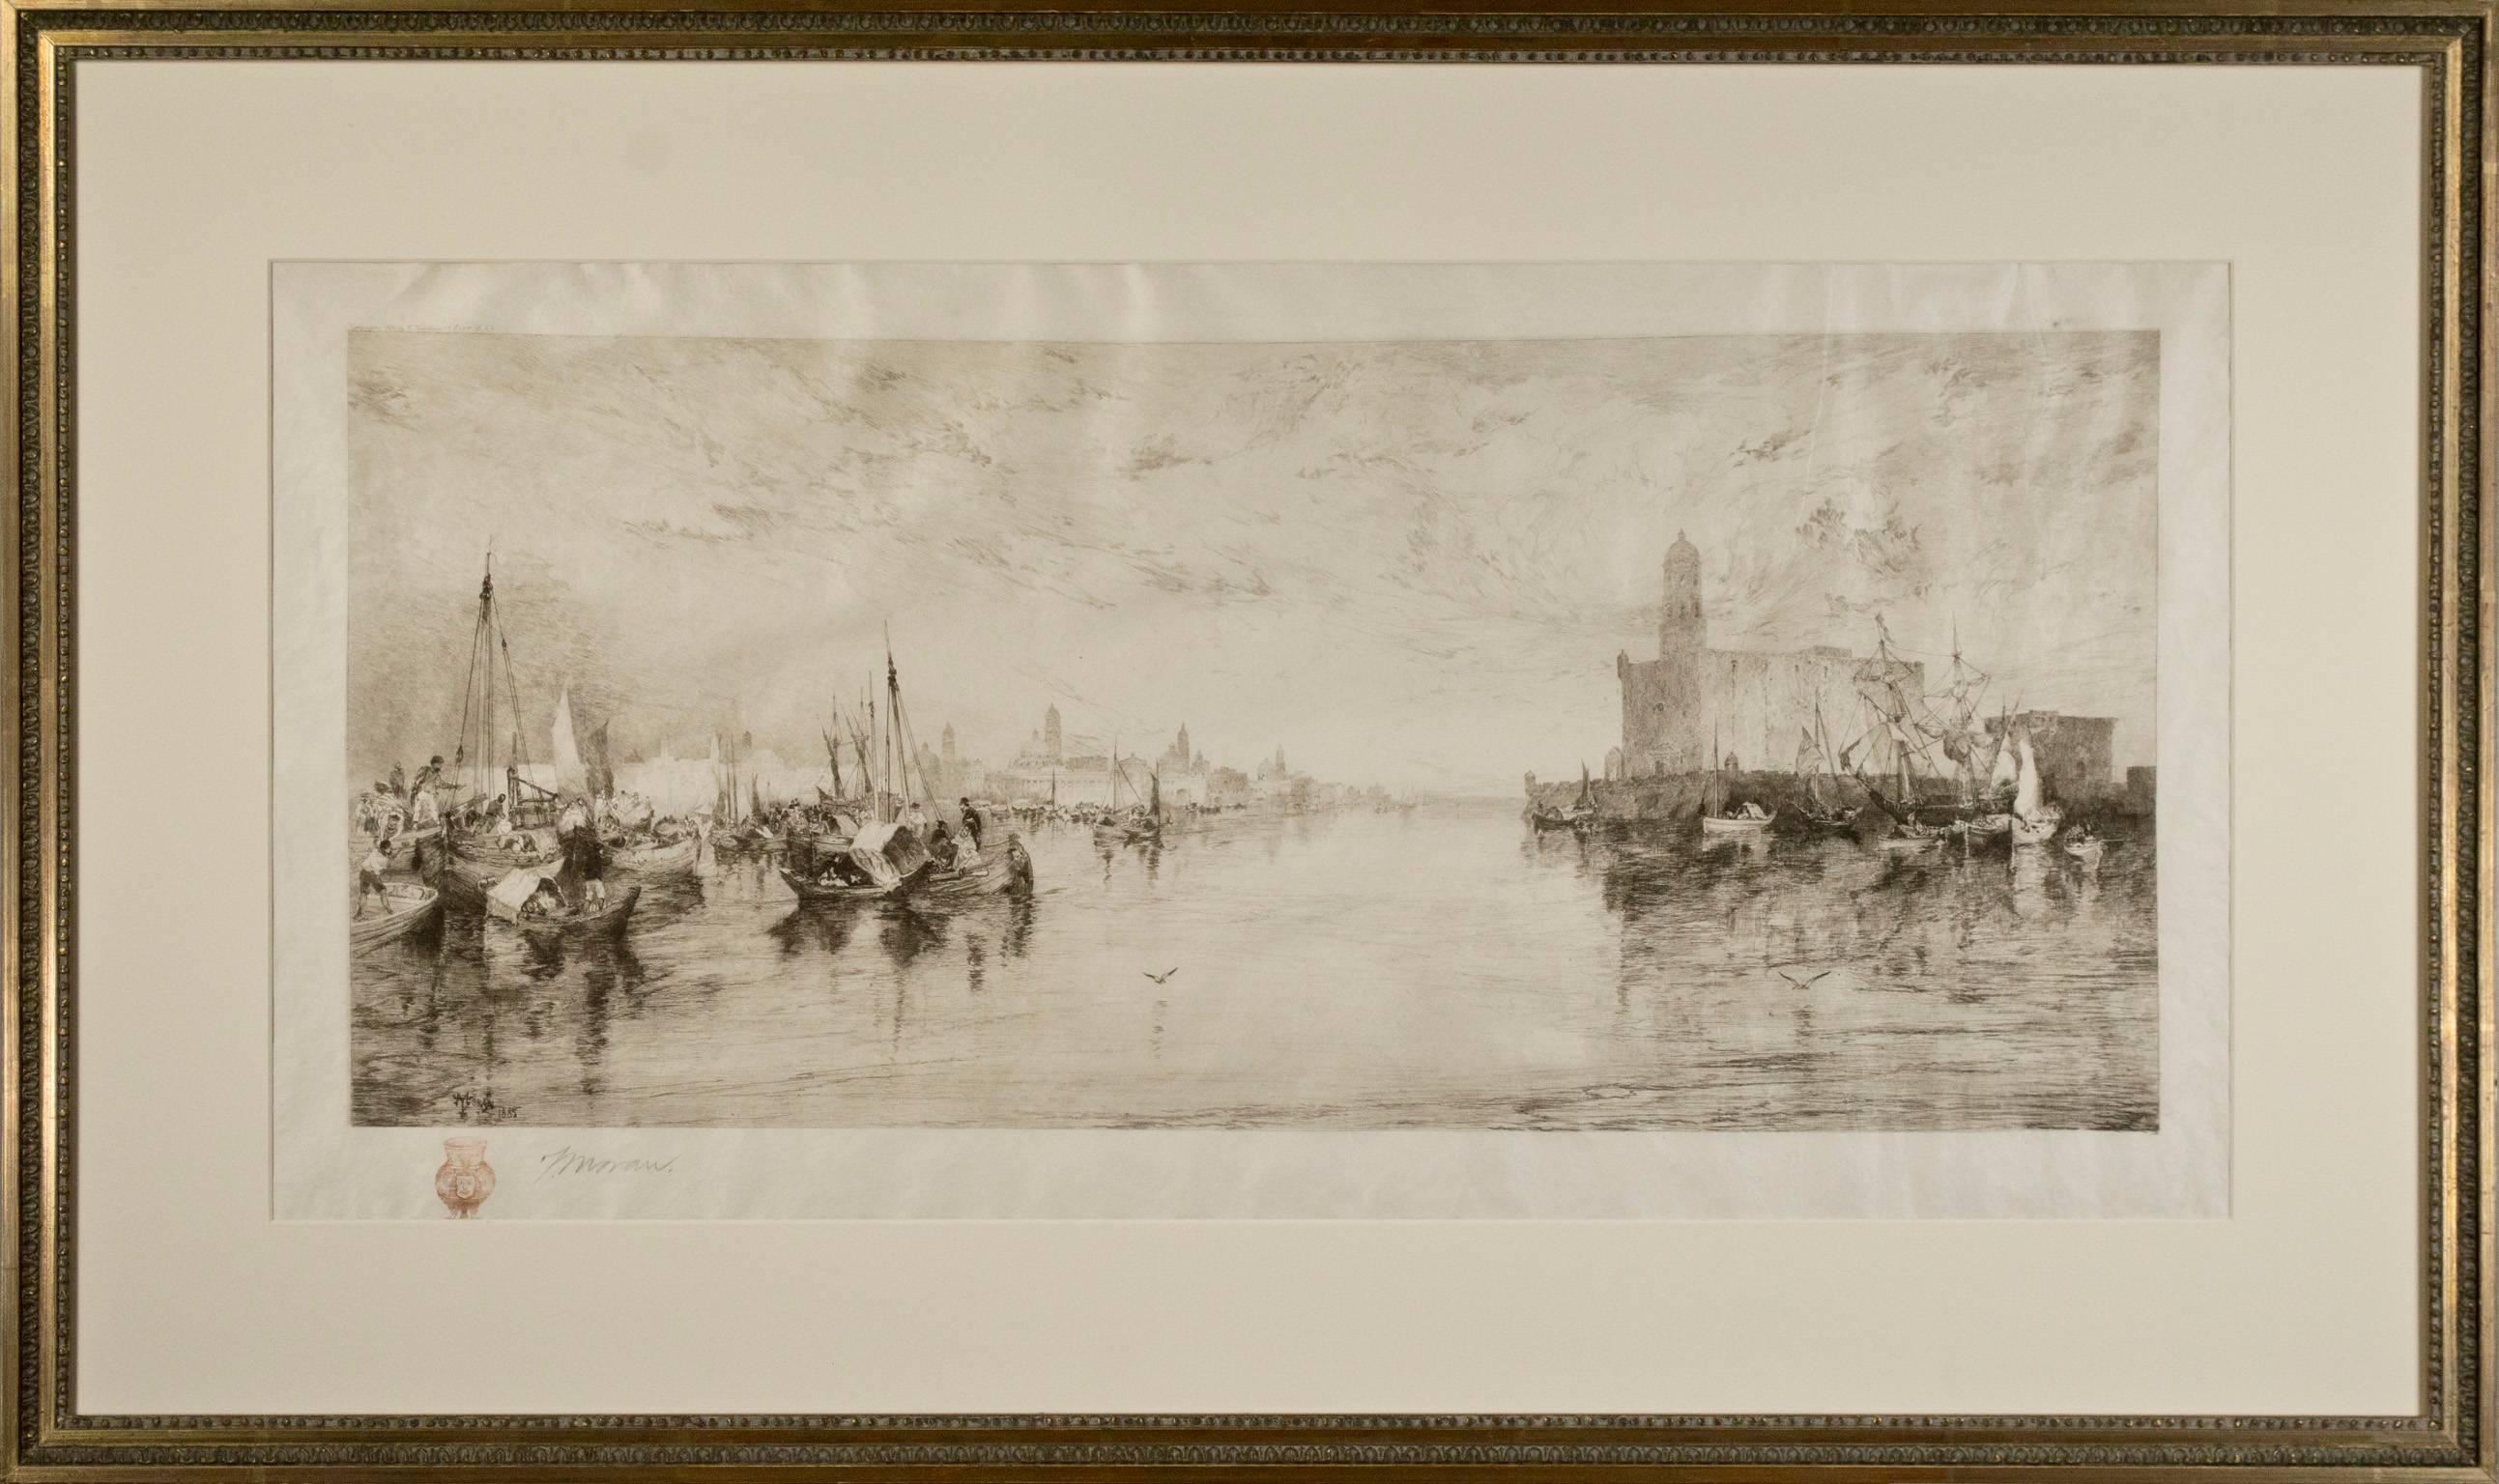 This black and white etching by American painter and print maker of the Hudson River School in New York: Thomas Moran, is a rare Klackner #53 of the catalogue raisonné, depicting 